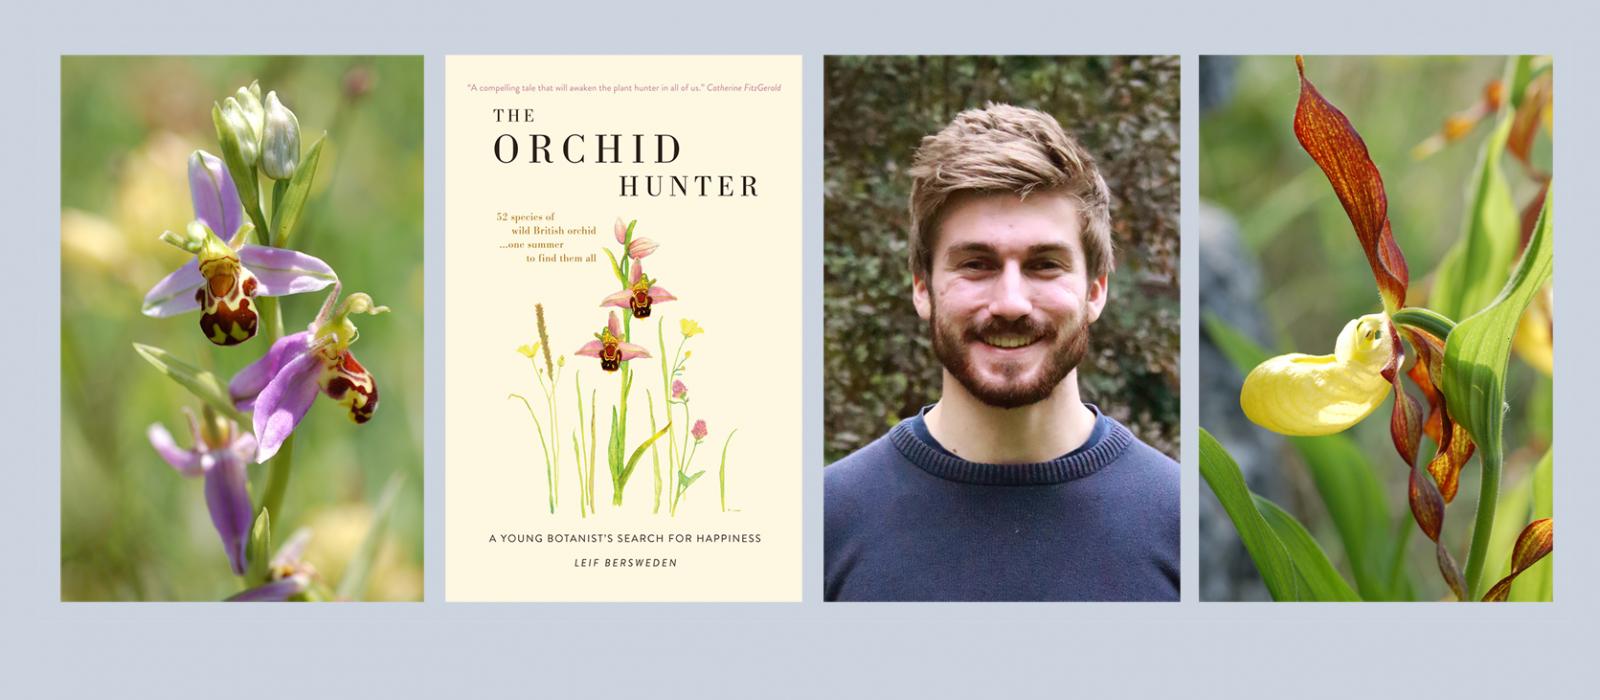 Leif Bersweden and his new book, The Orchid Hunter